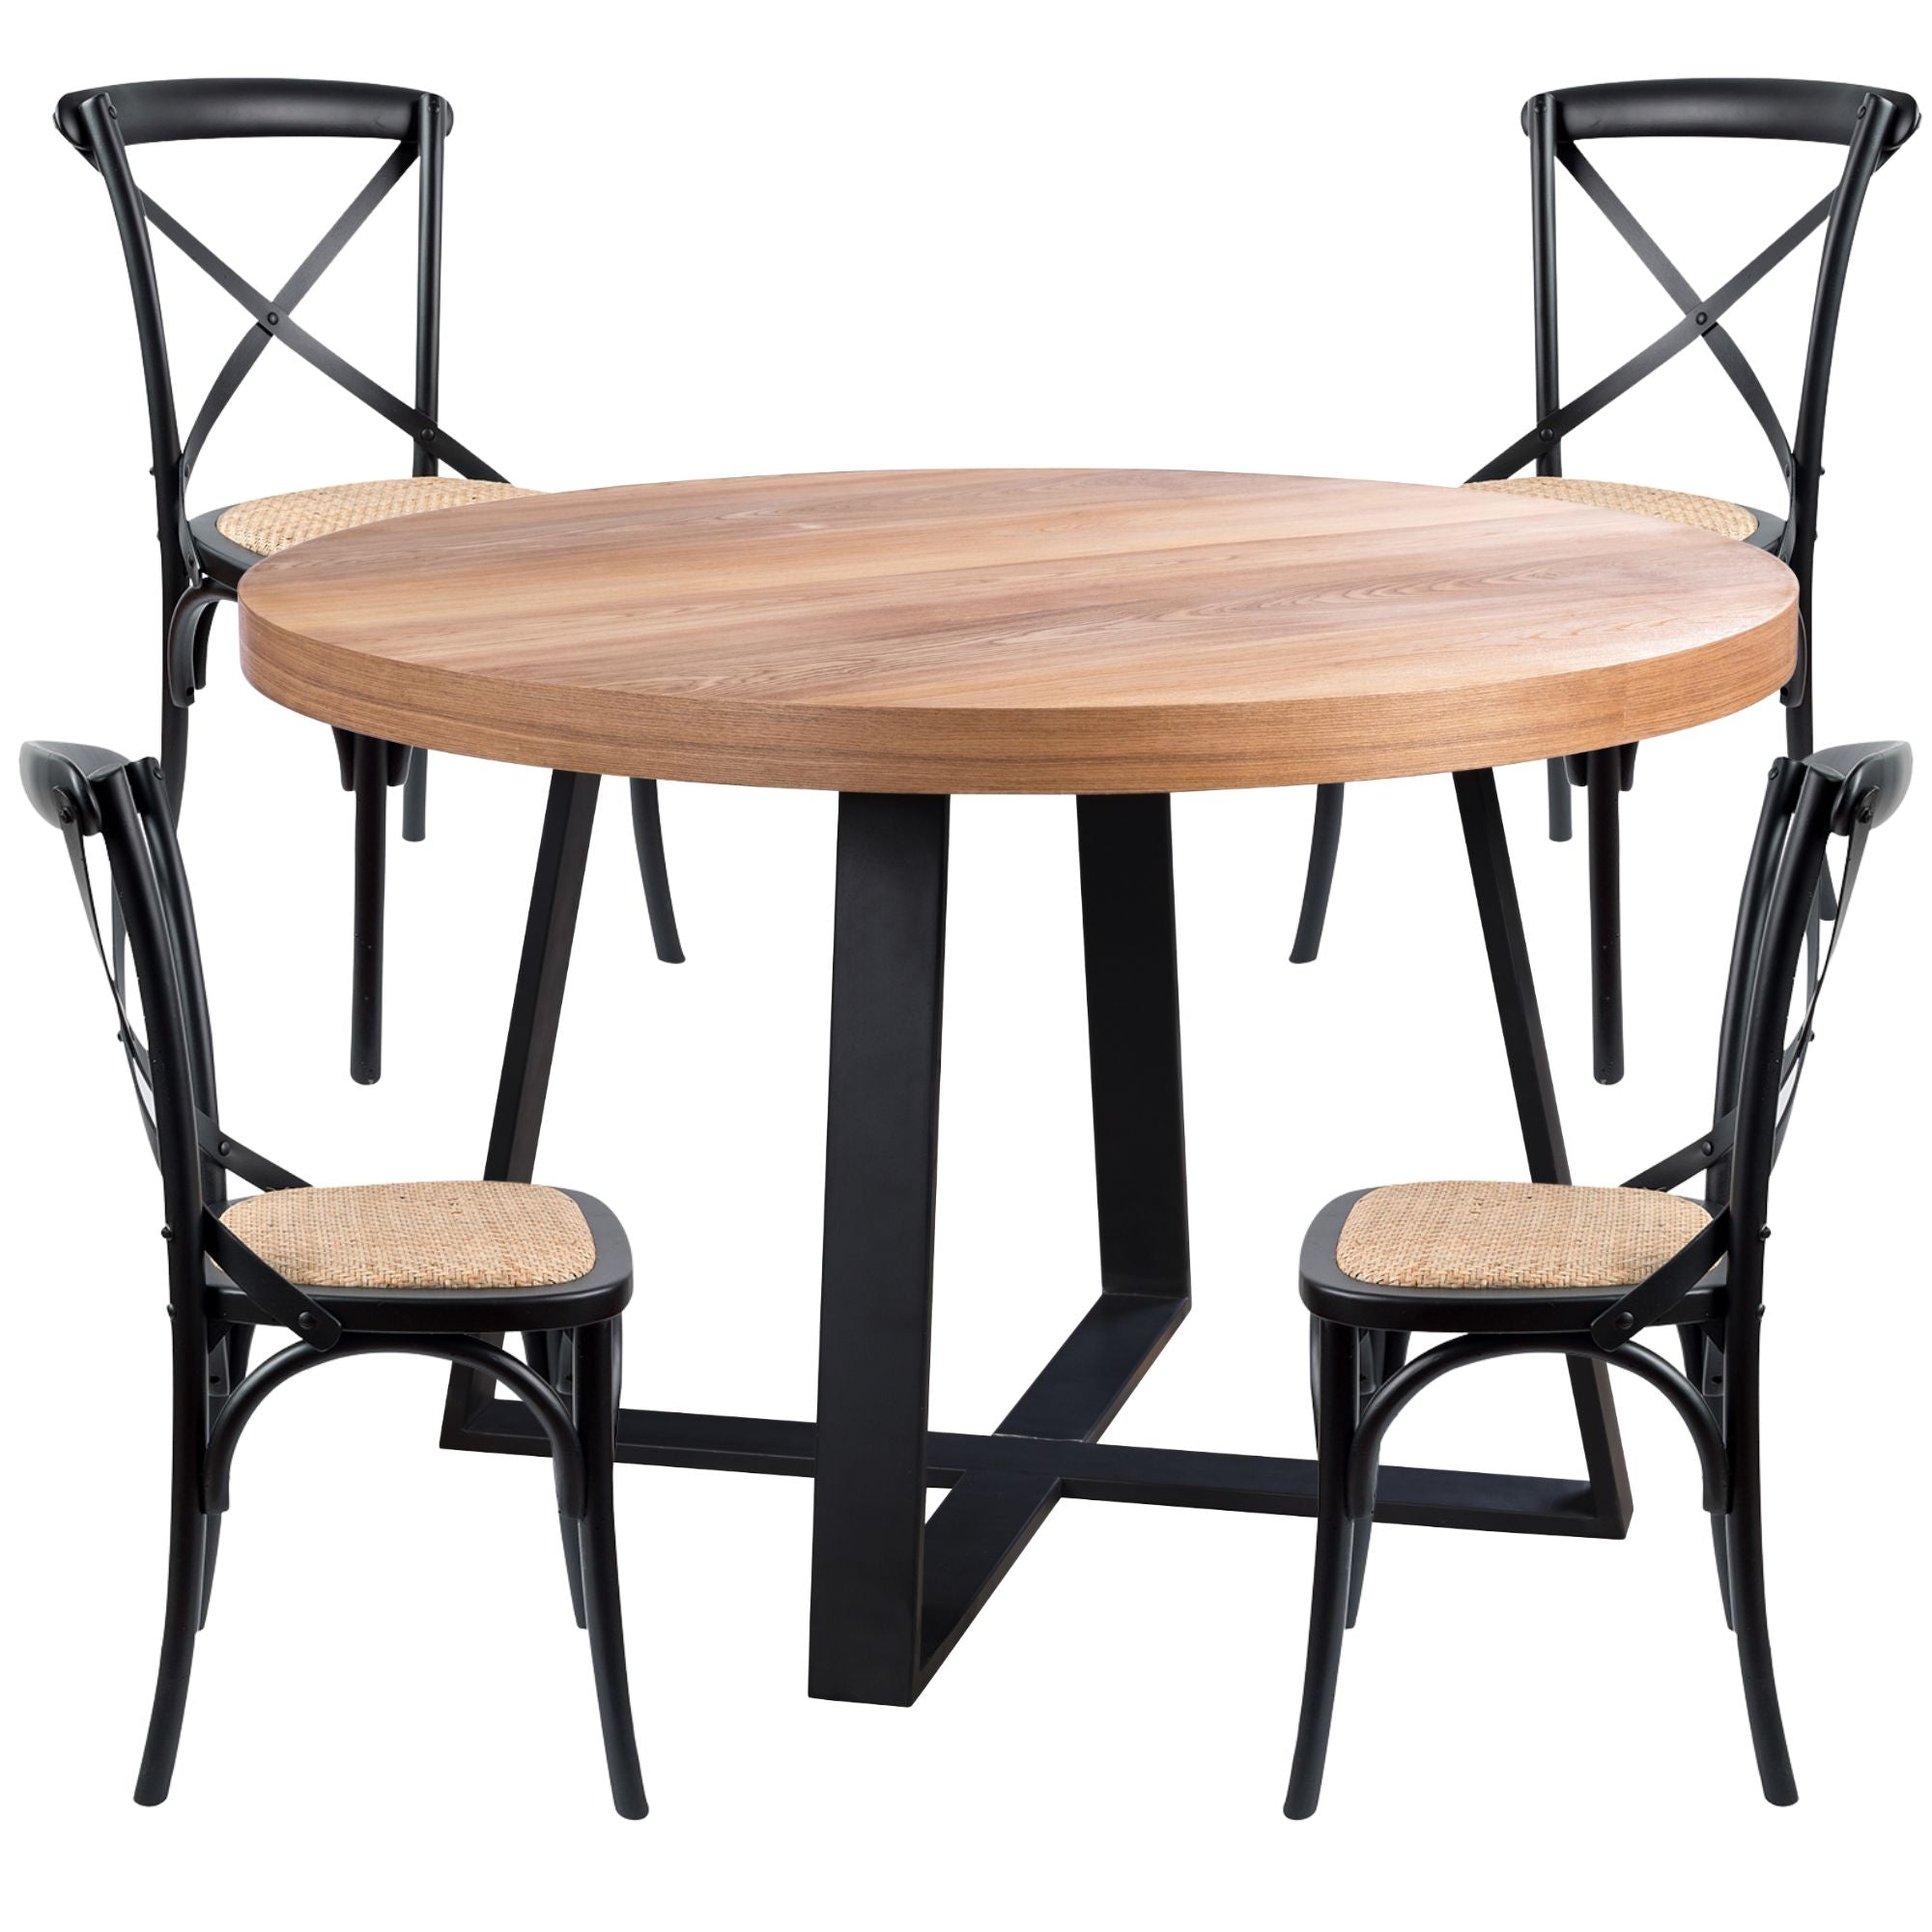 Petunia  5pc 120cm Round Dining Table Set 4 Cross Back Chair Elm Timber Wood - SILBERSHELL